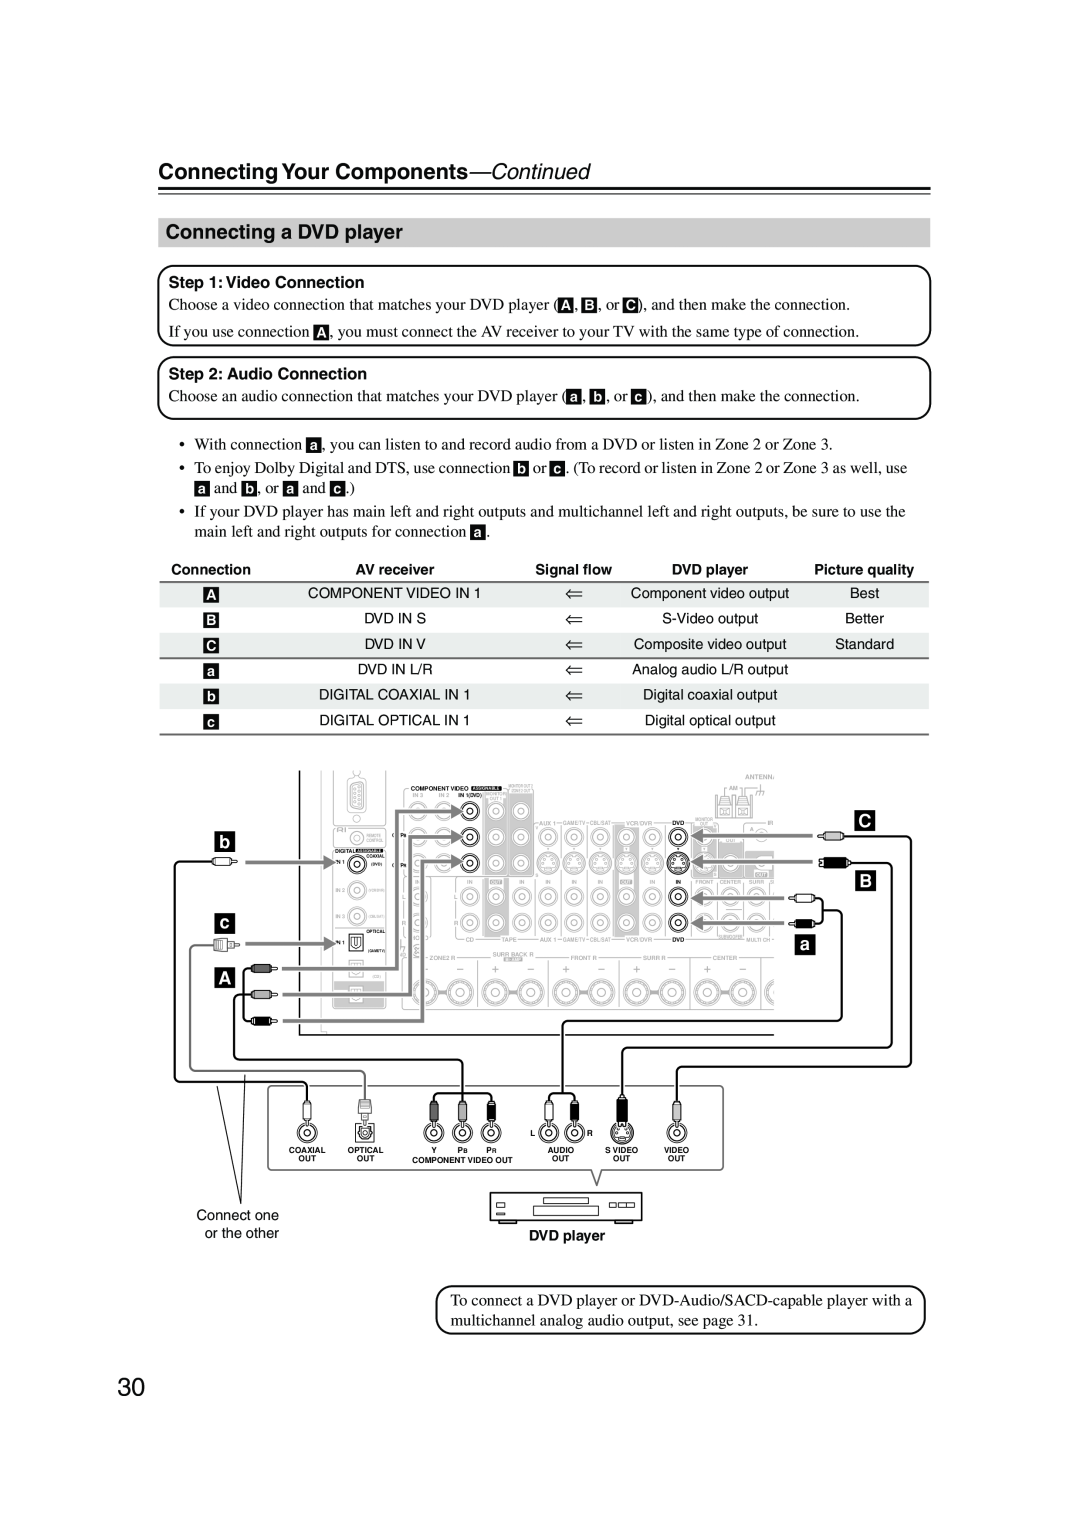 Integra DTR-7.8 instruction manual Connecting a DVD player, Connecting Your Components—Continued, b c A 